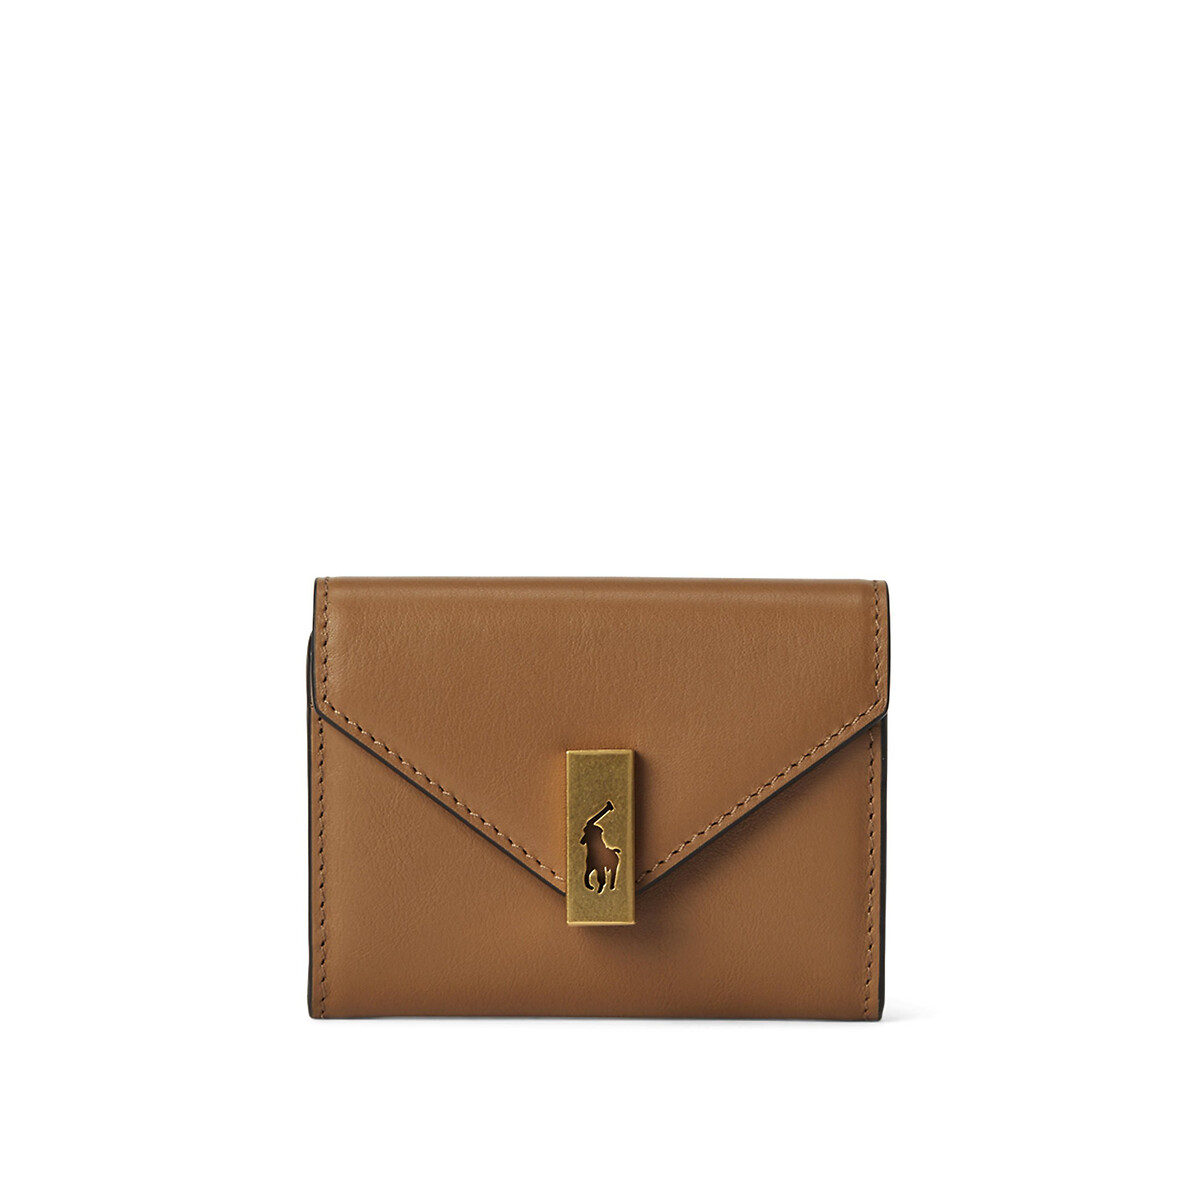 Smooth Leather Card Holder with Envelope Flap